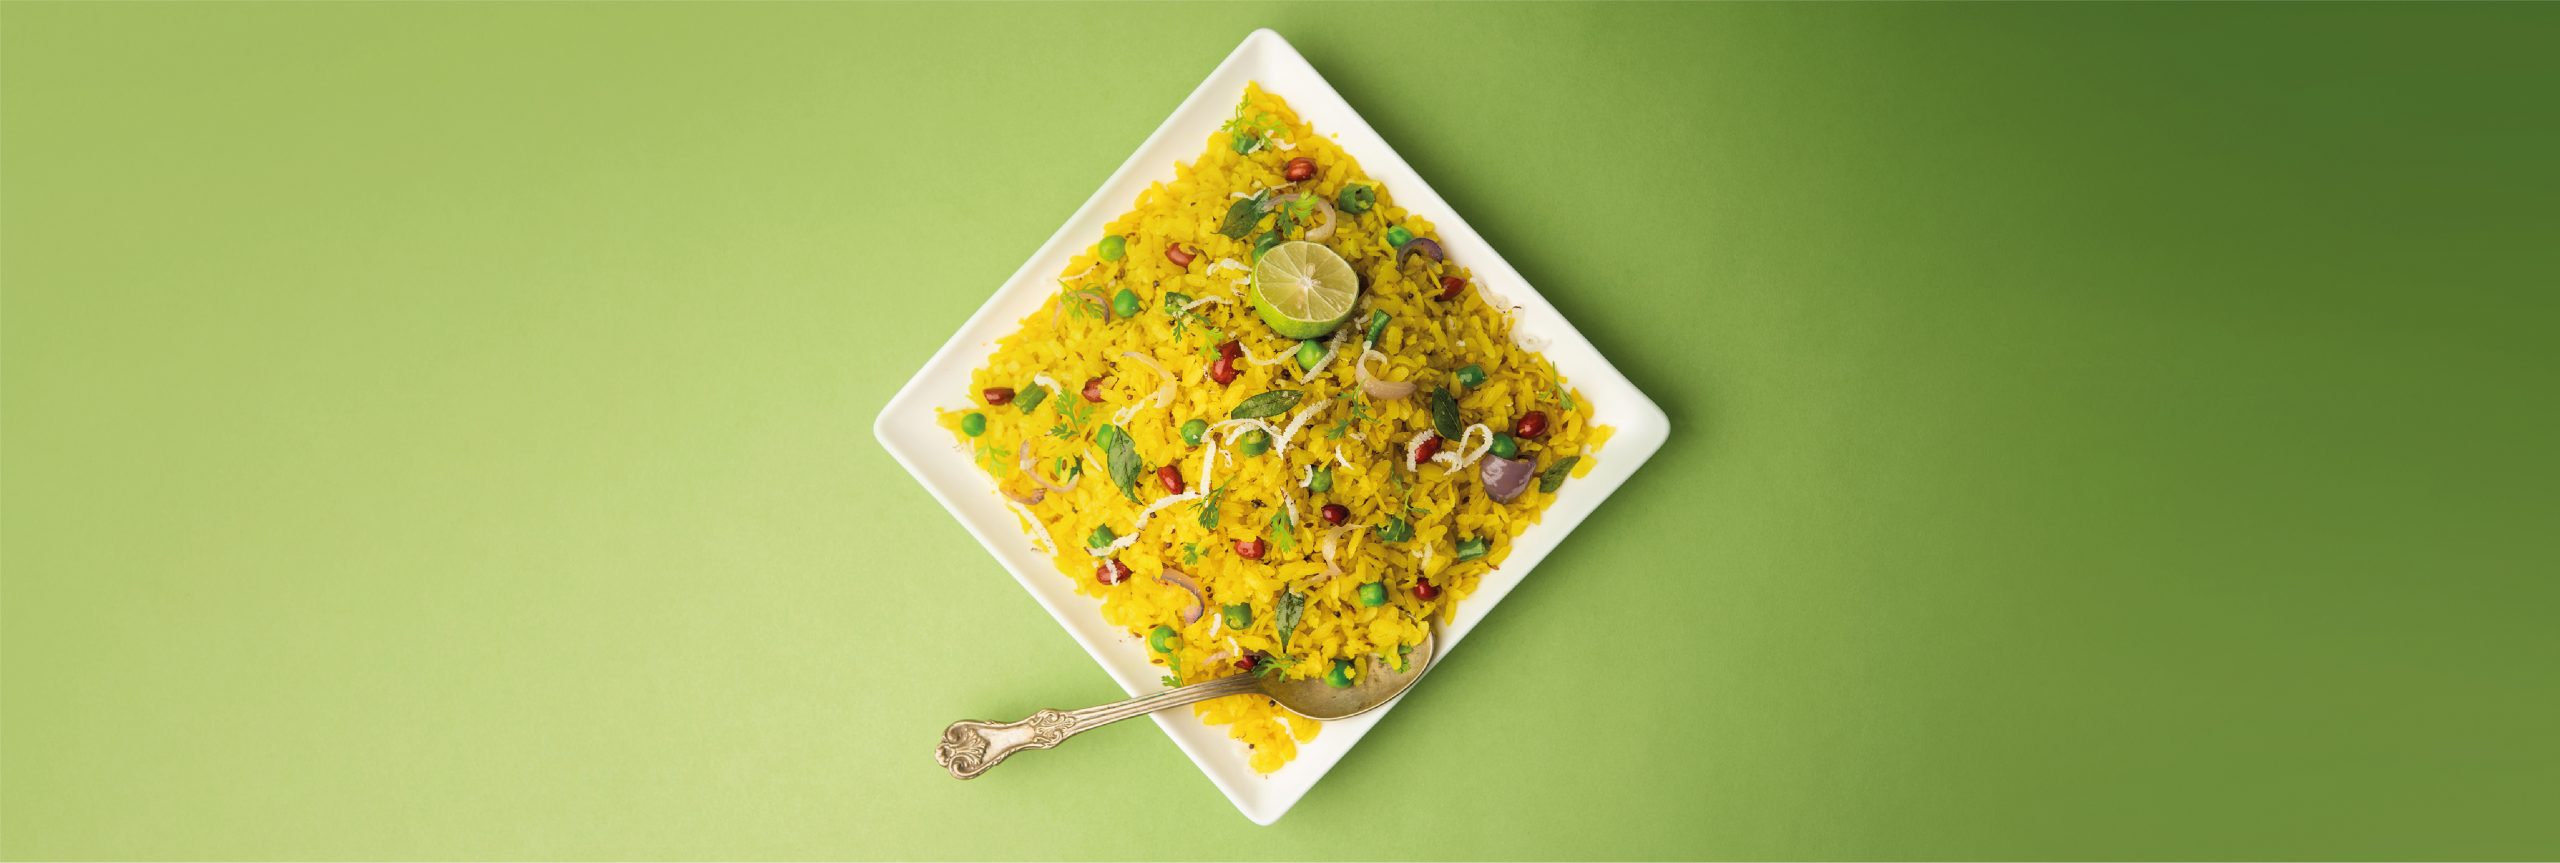 is poha good for weight loss